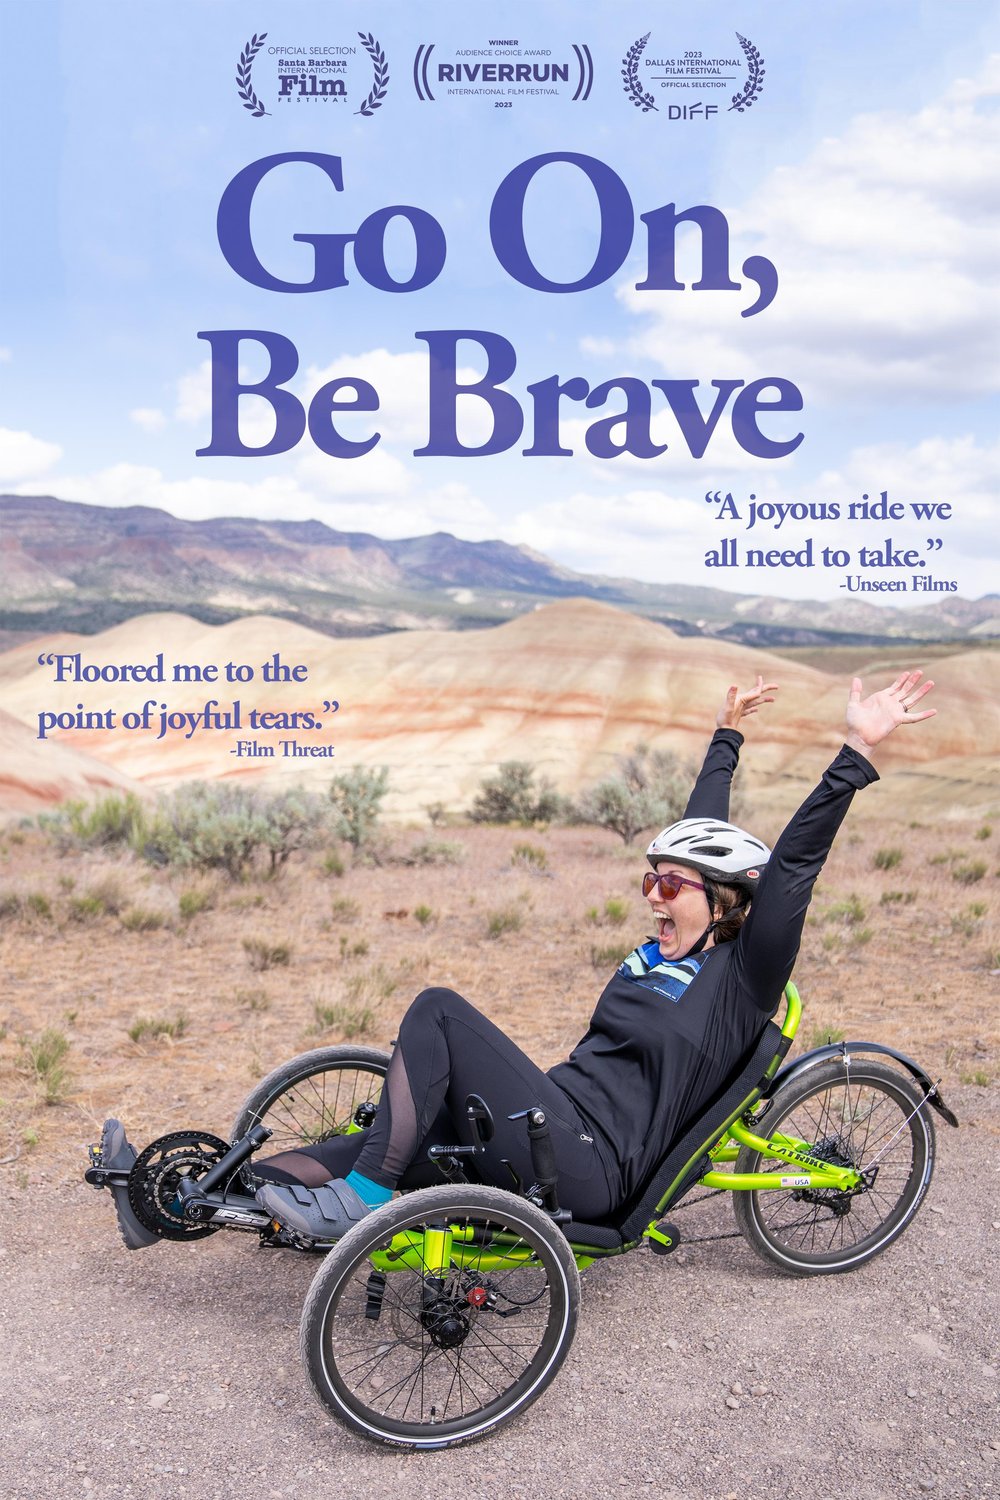 Poster of the movie Go On, Be Brave